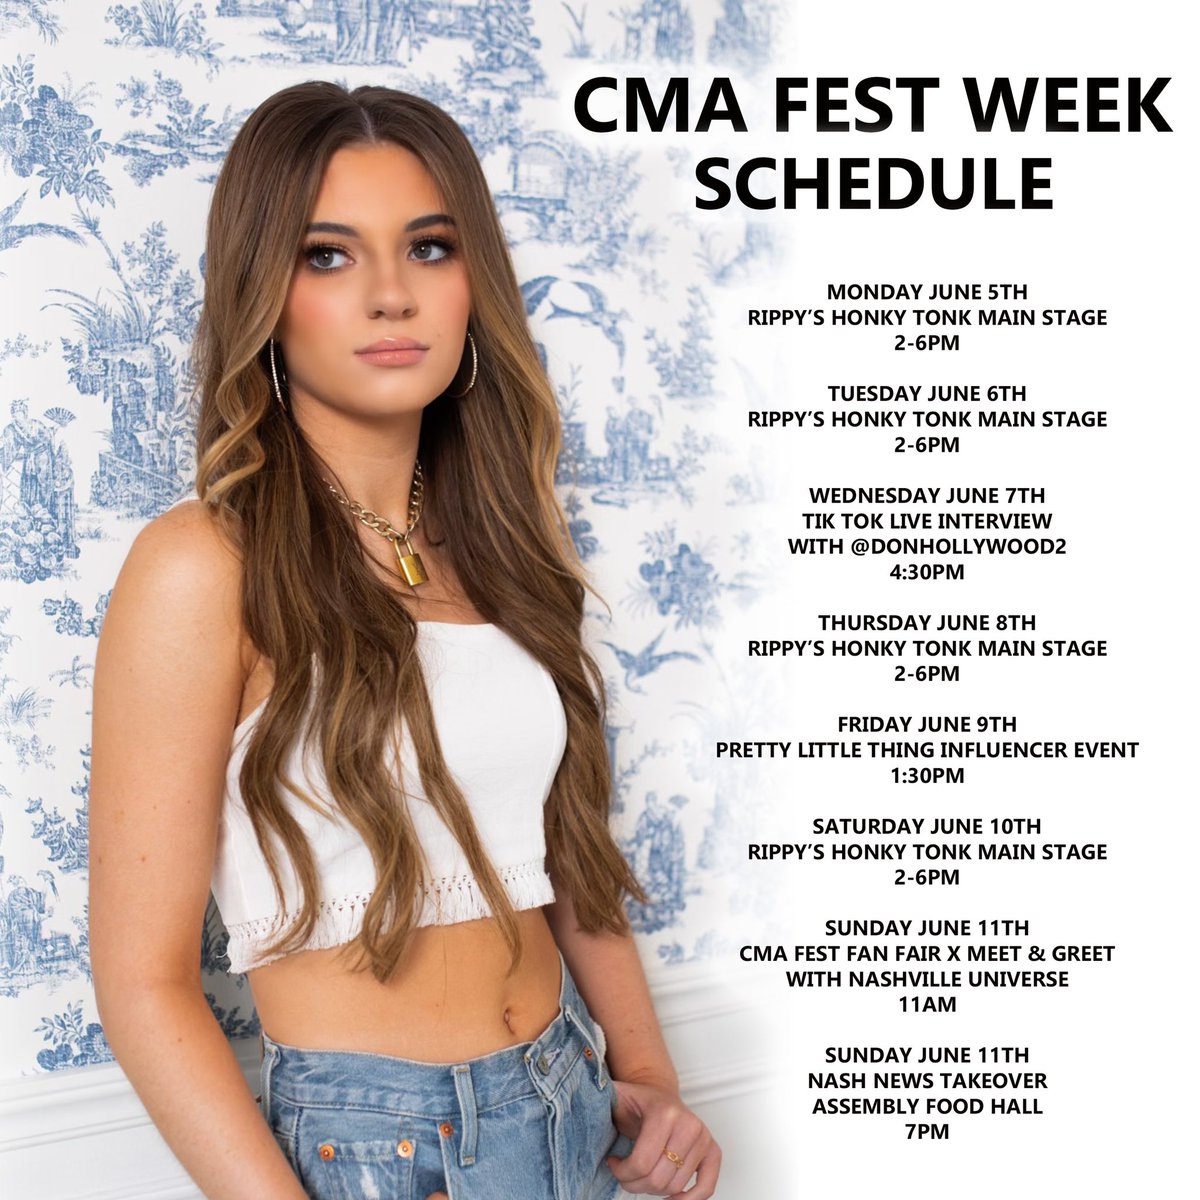 It’s finally CMA Fest Week!! Lots of shows this week✨#CMAfest #music #festival #country